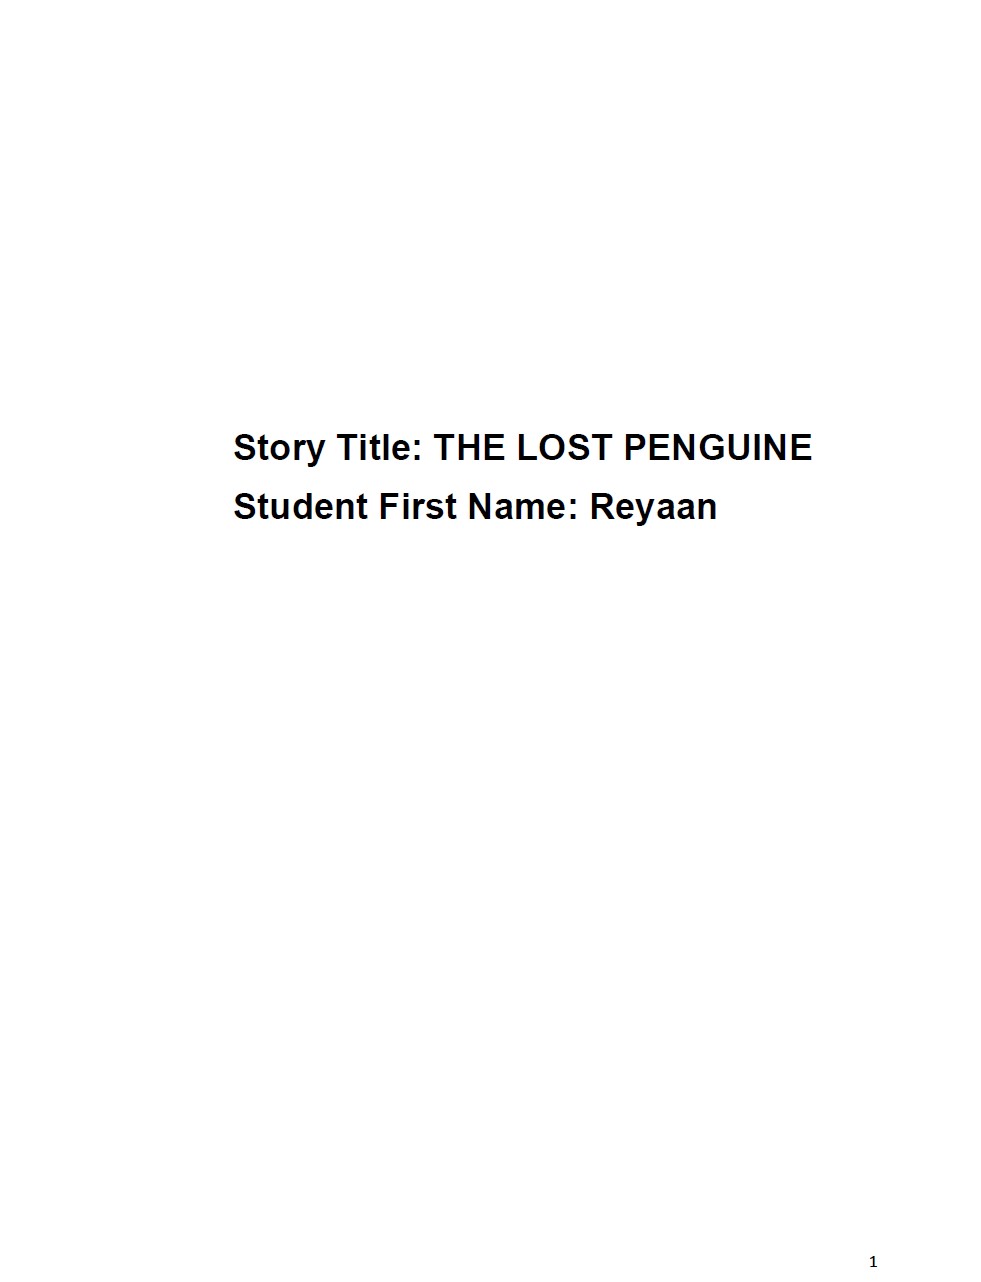 THE LOST PENGUINE by Reyaan V.